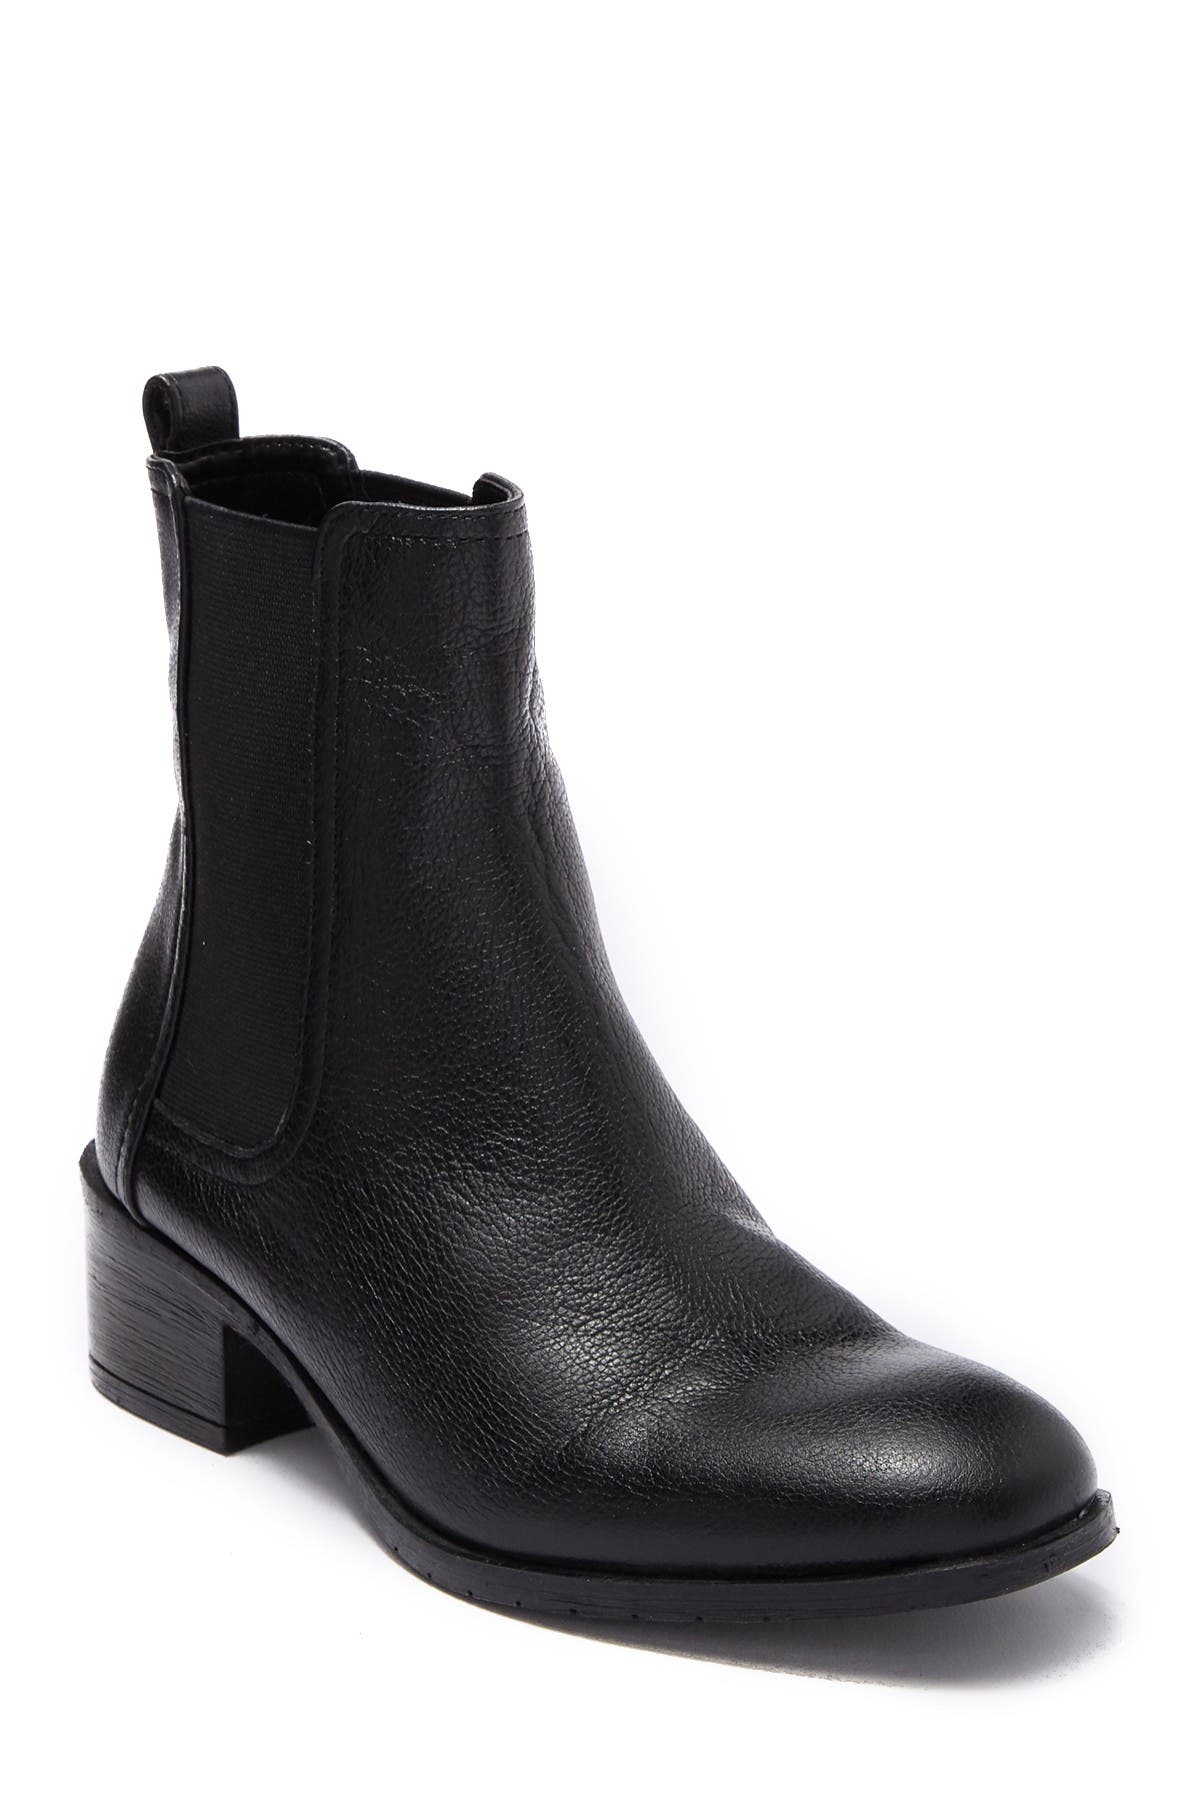 kenneth cole reaction black boots